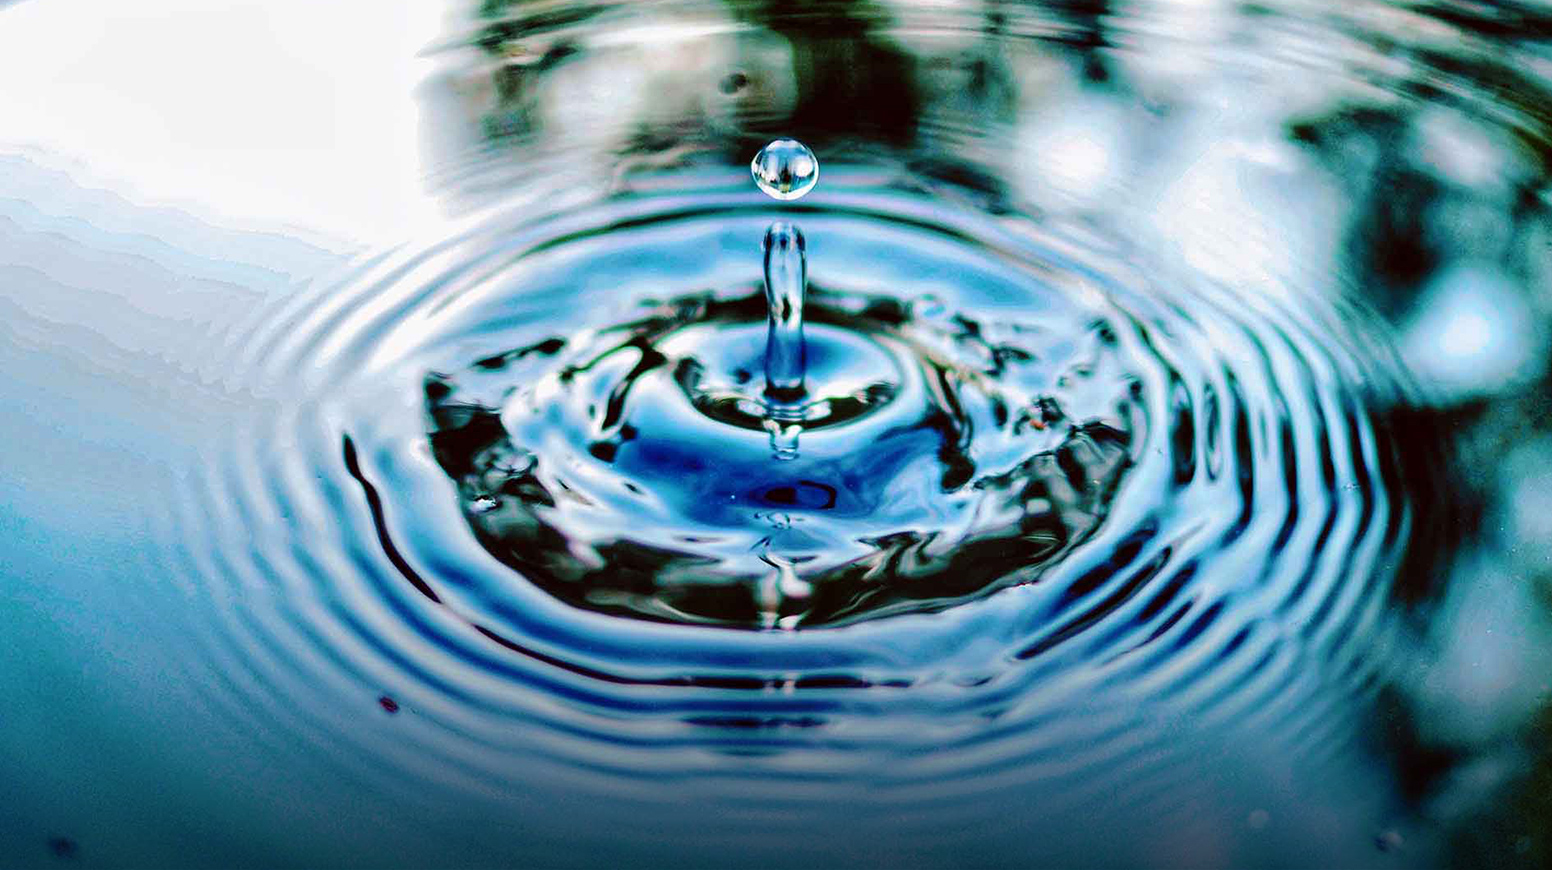 A close-up of a drop of water sending ripples out on the surface of a lake